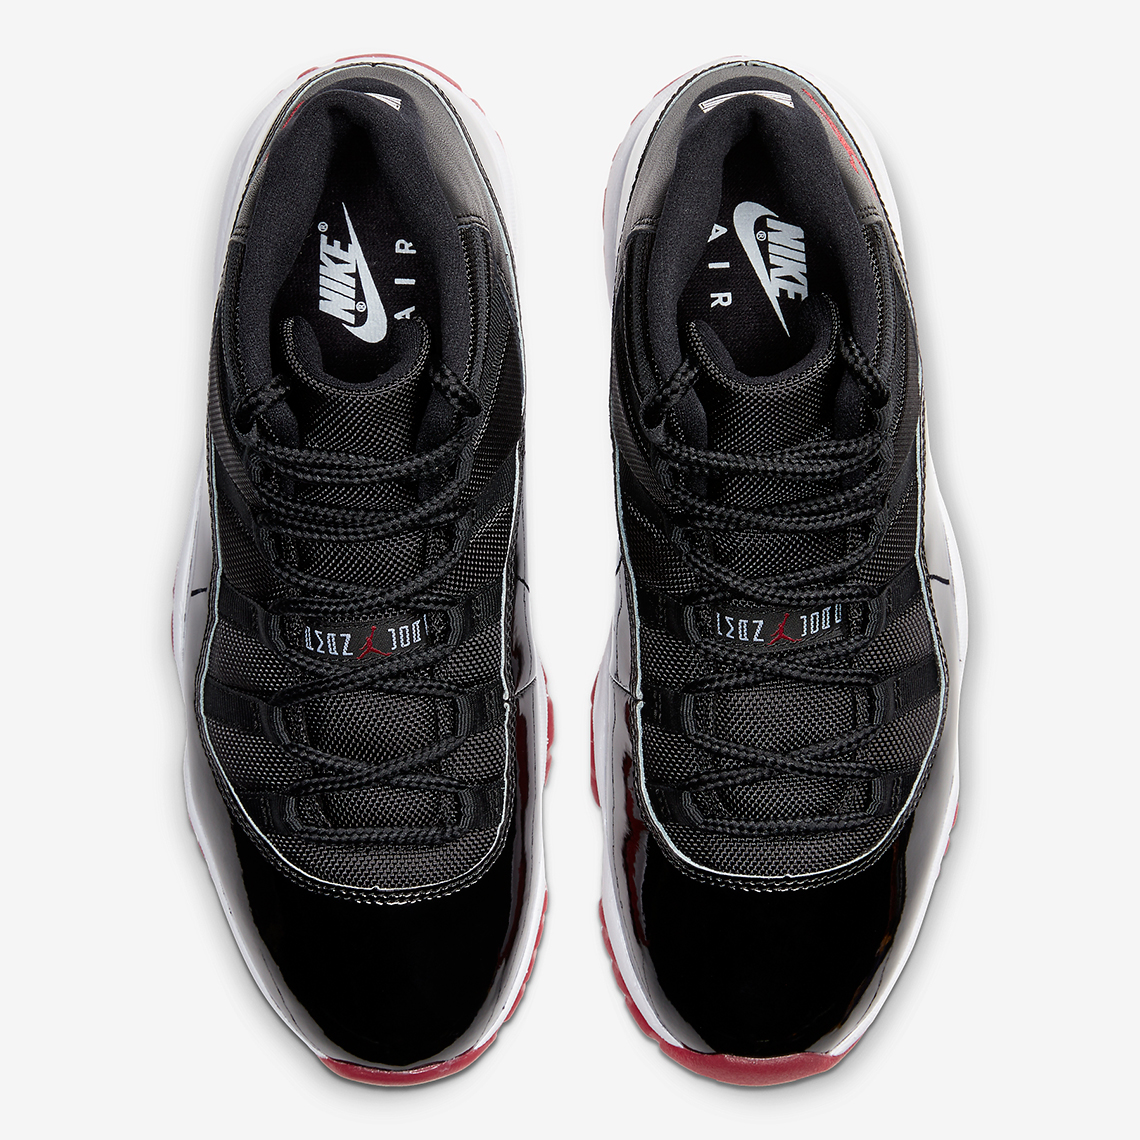 are the bred 11s going to be raffled